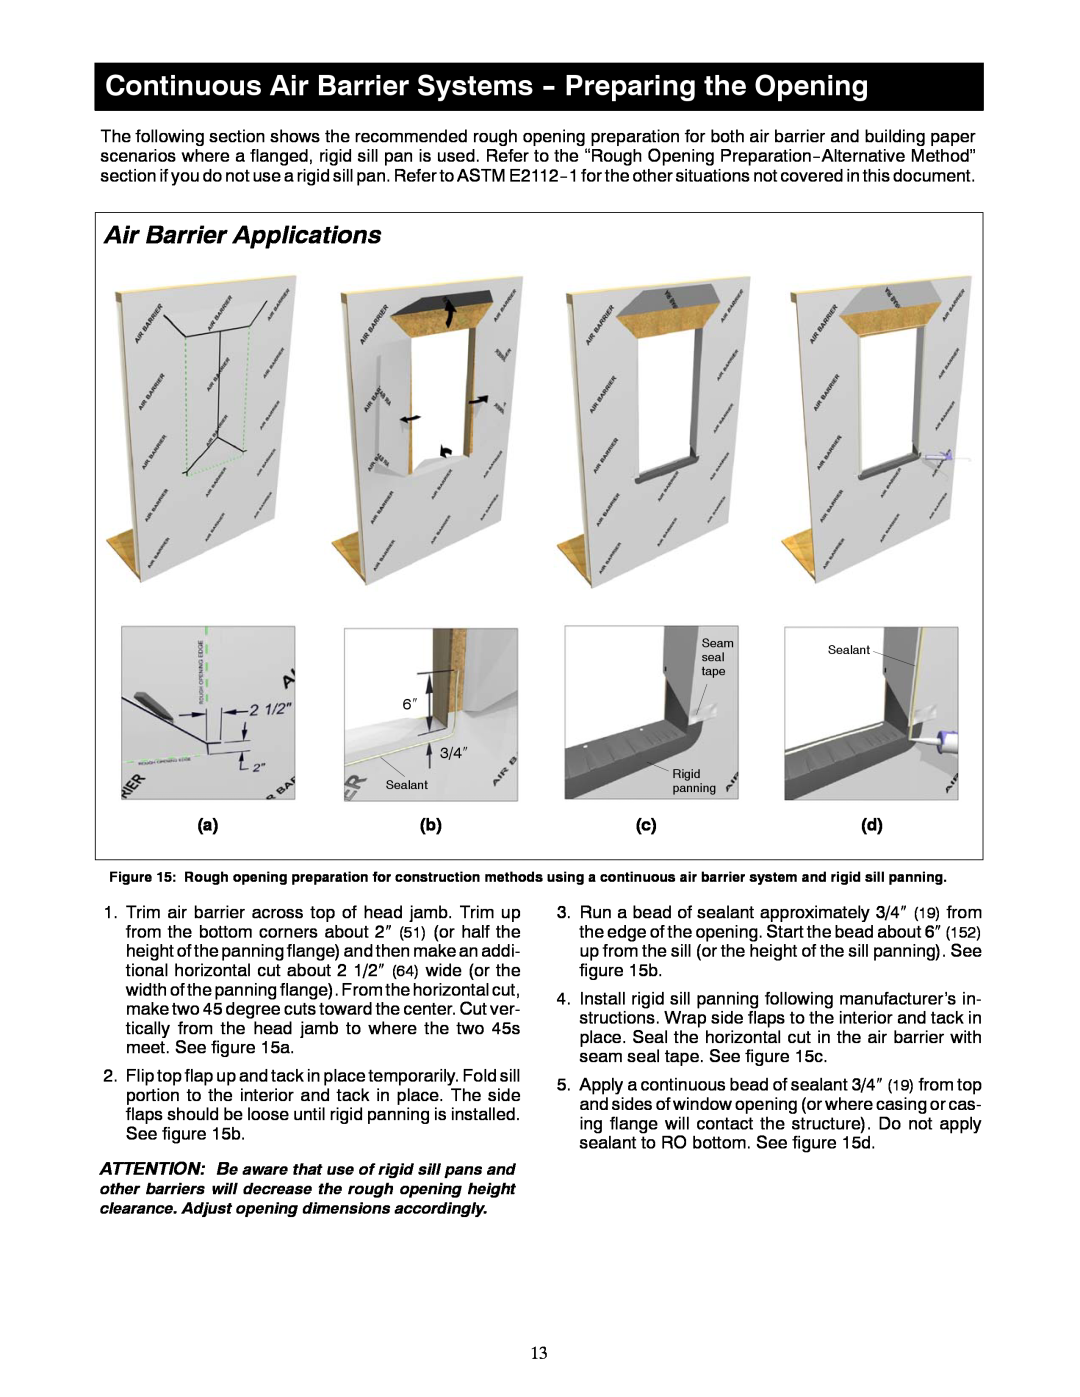 Marvin Window manual Continuous Air Barrier Systems - Preparing the Opening, Air Barrier Applications 